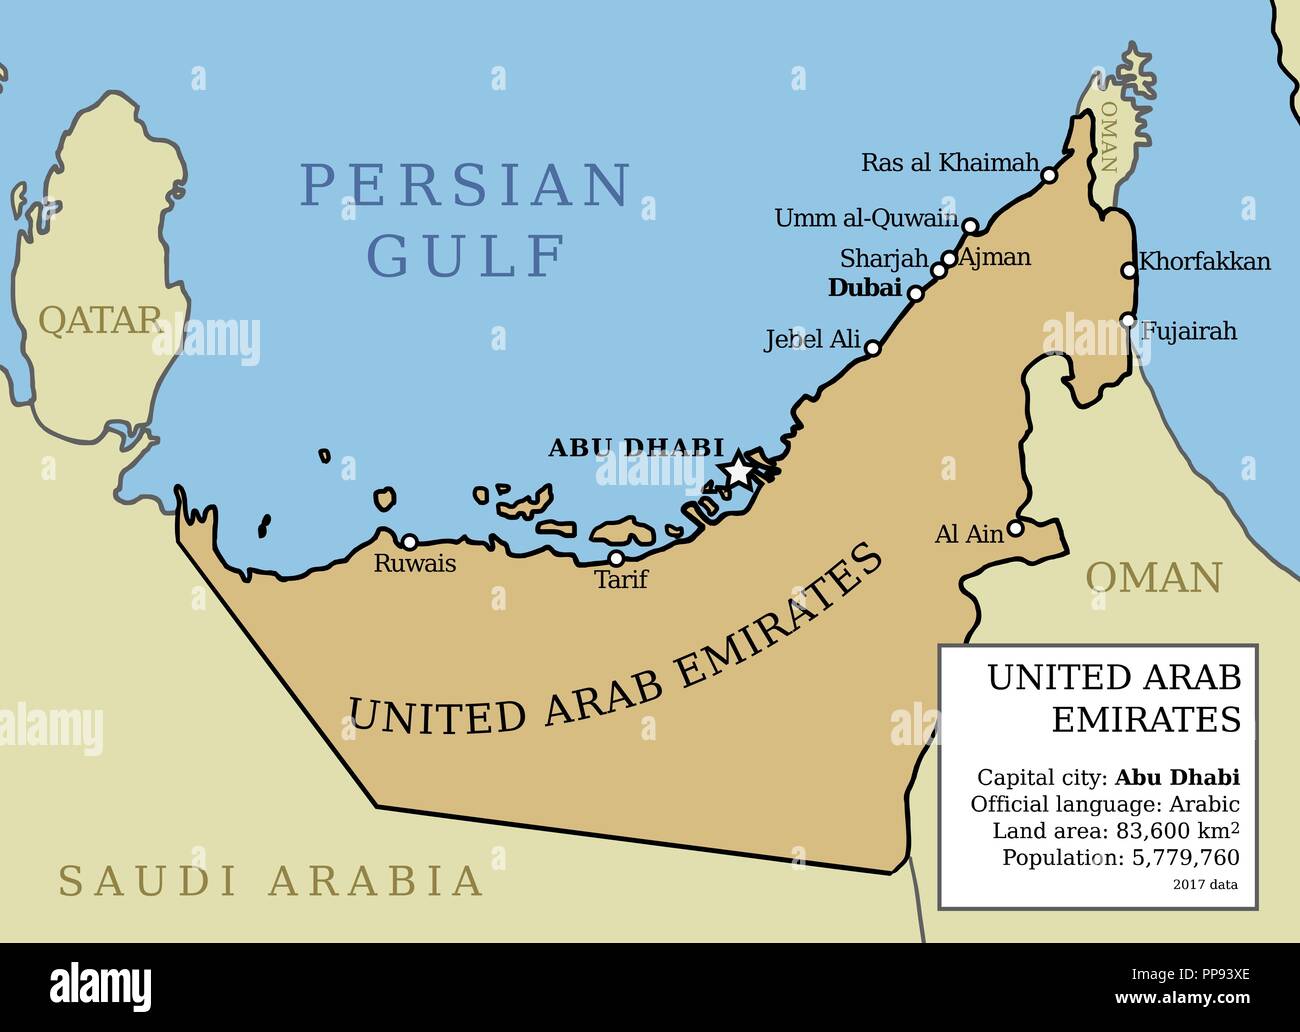 United Arab Emirates (UAE) map. Outline illustration country map with main cities and data table. Stock Vector